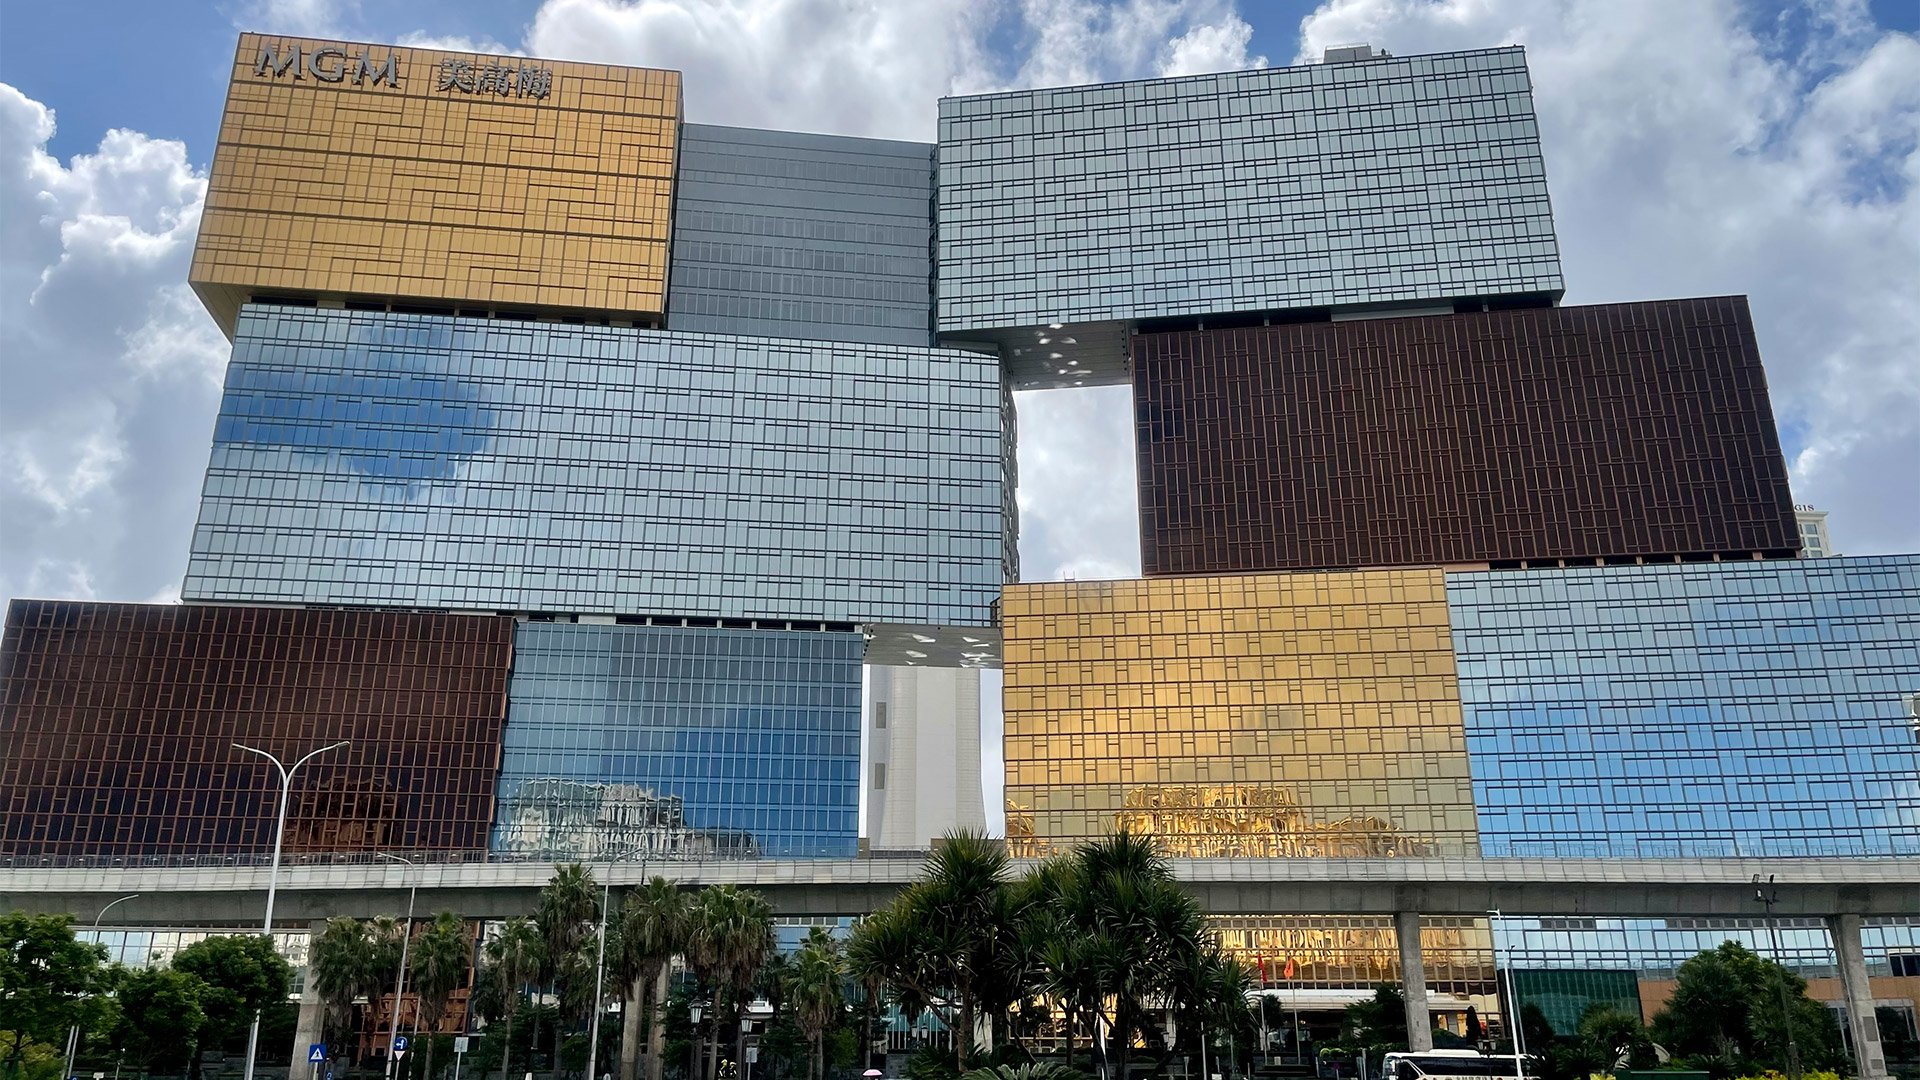 Macau’s MGM Cotai casino reopens after all staff and guests test negative for Covid